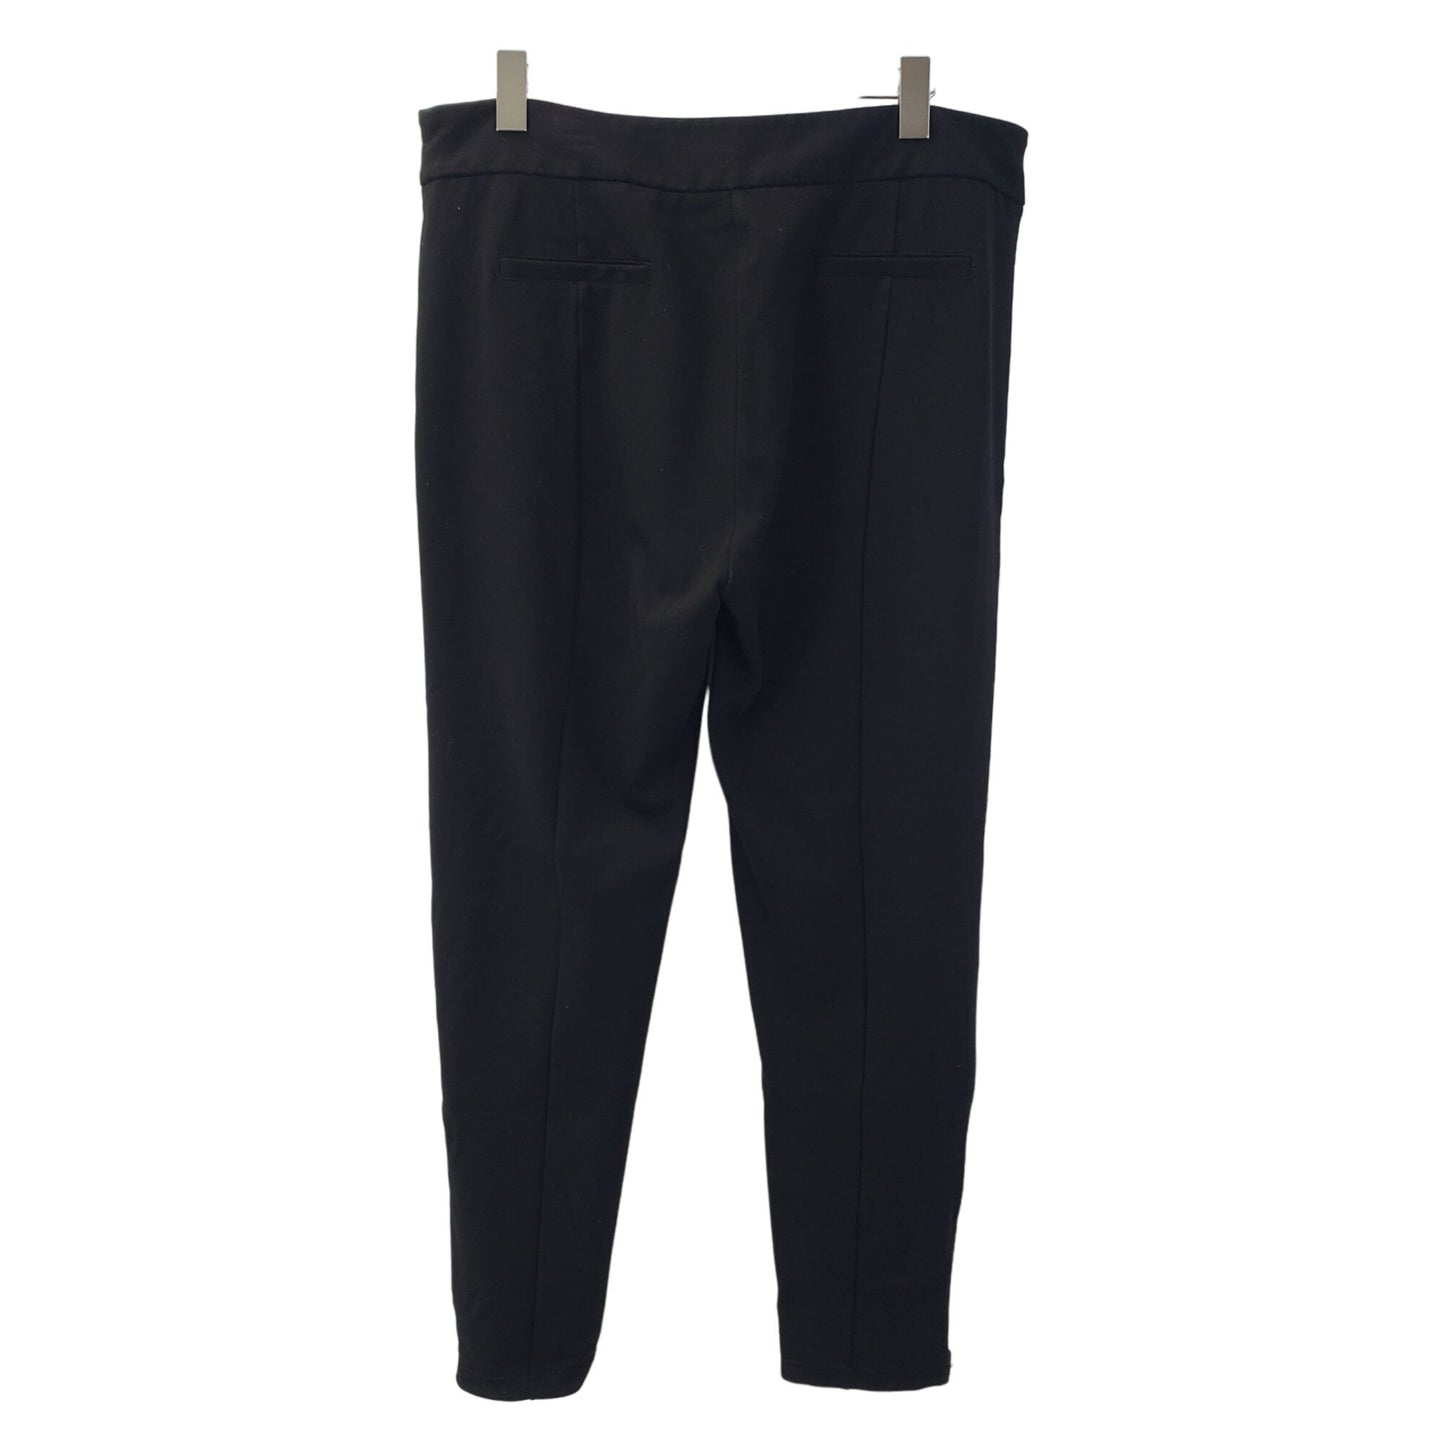 Betabrand Zip Ankle Pants Size XL